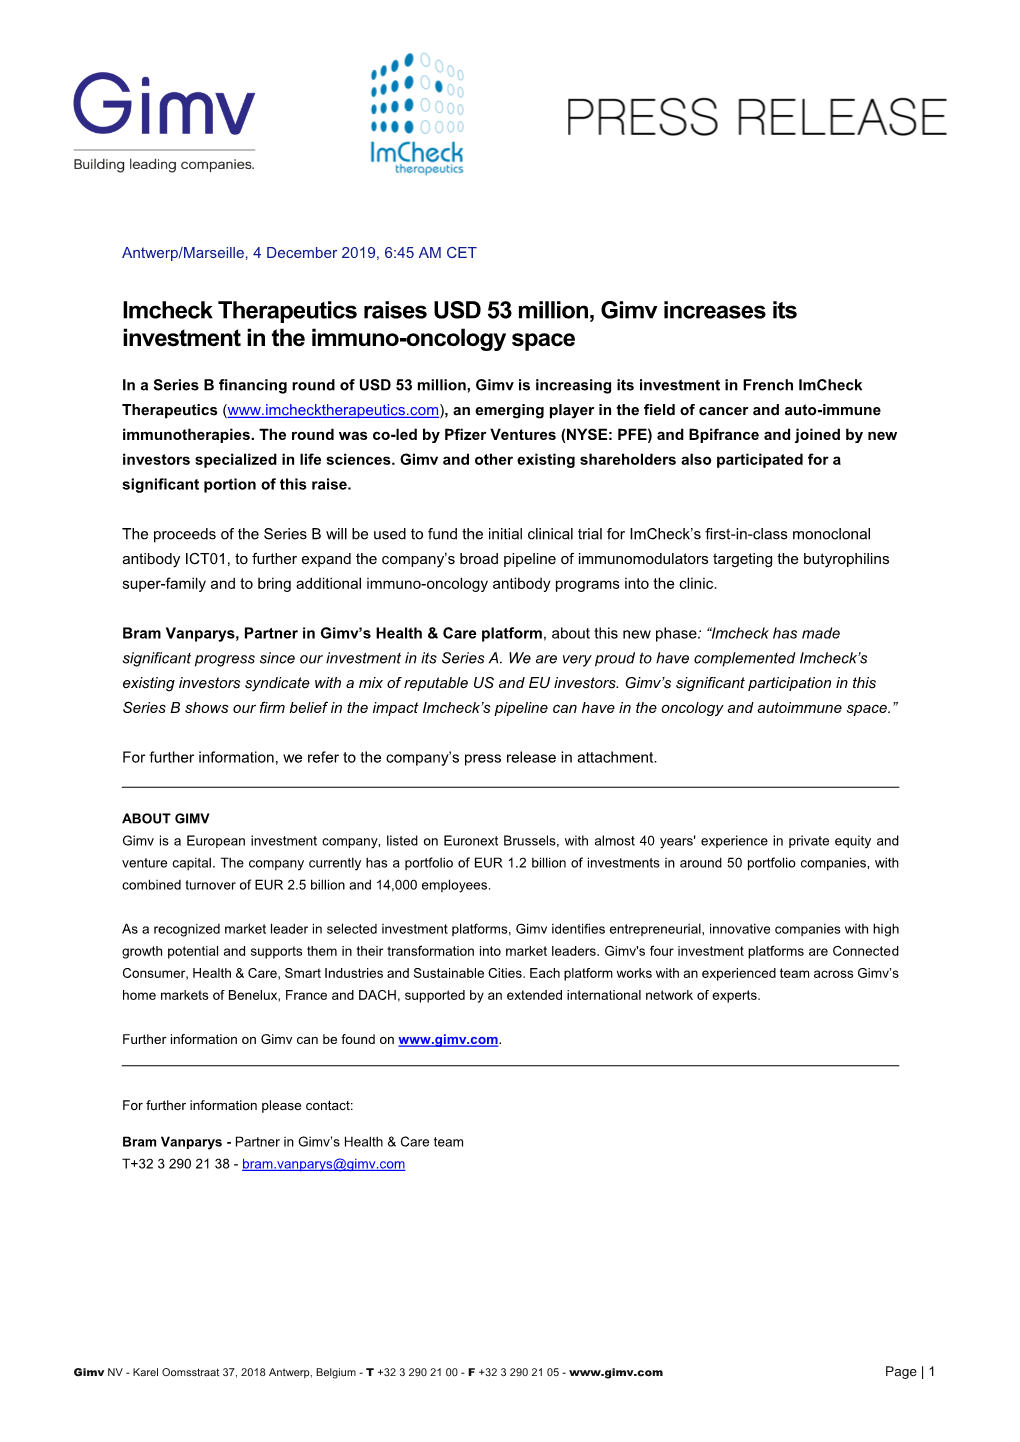 Imcheck Therapeutics Raises USD 53 Million, Gimv Increases Its Investment in the Immuno-Oncology Space